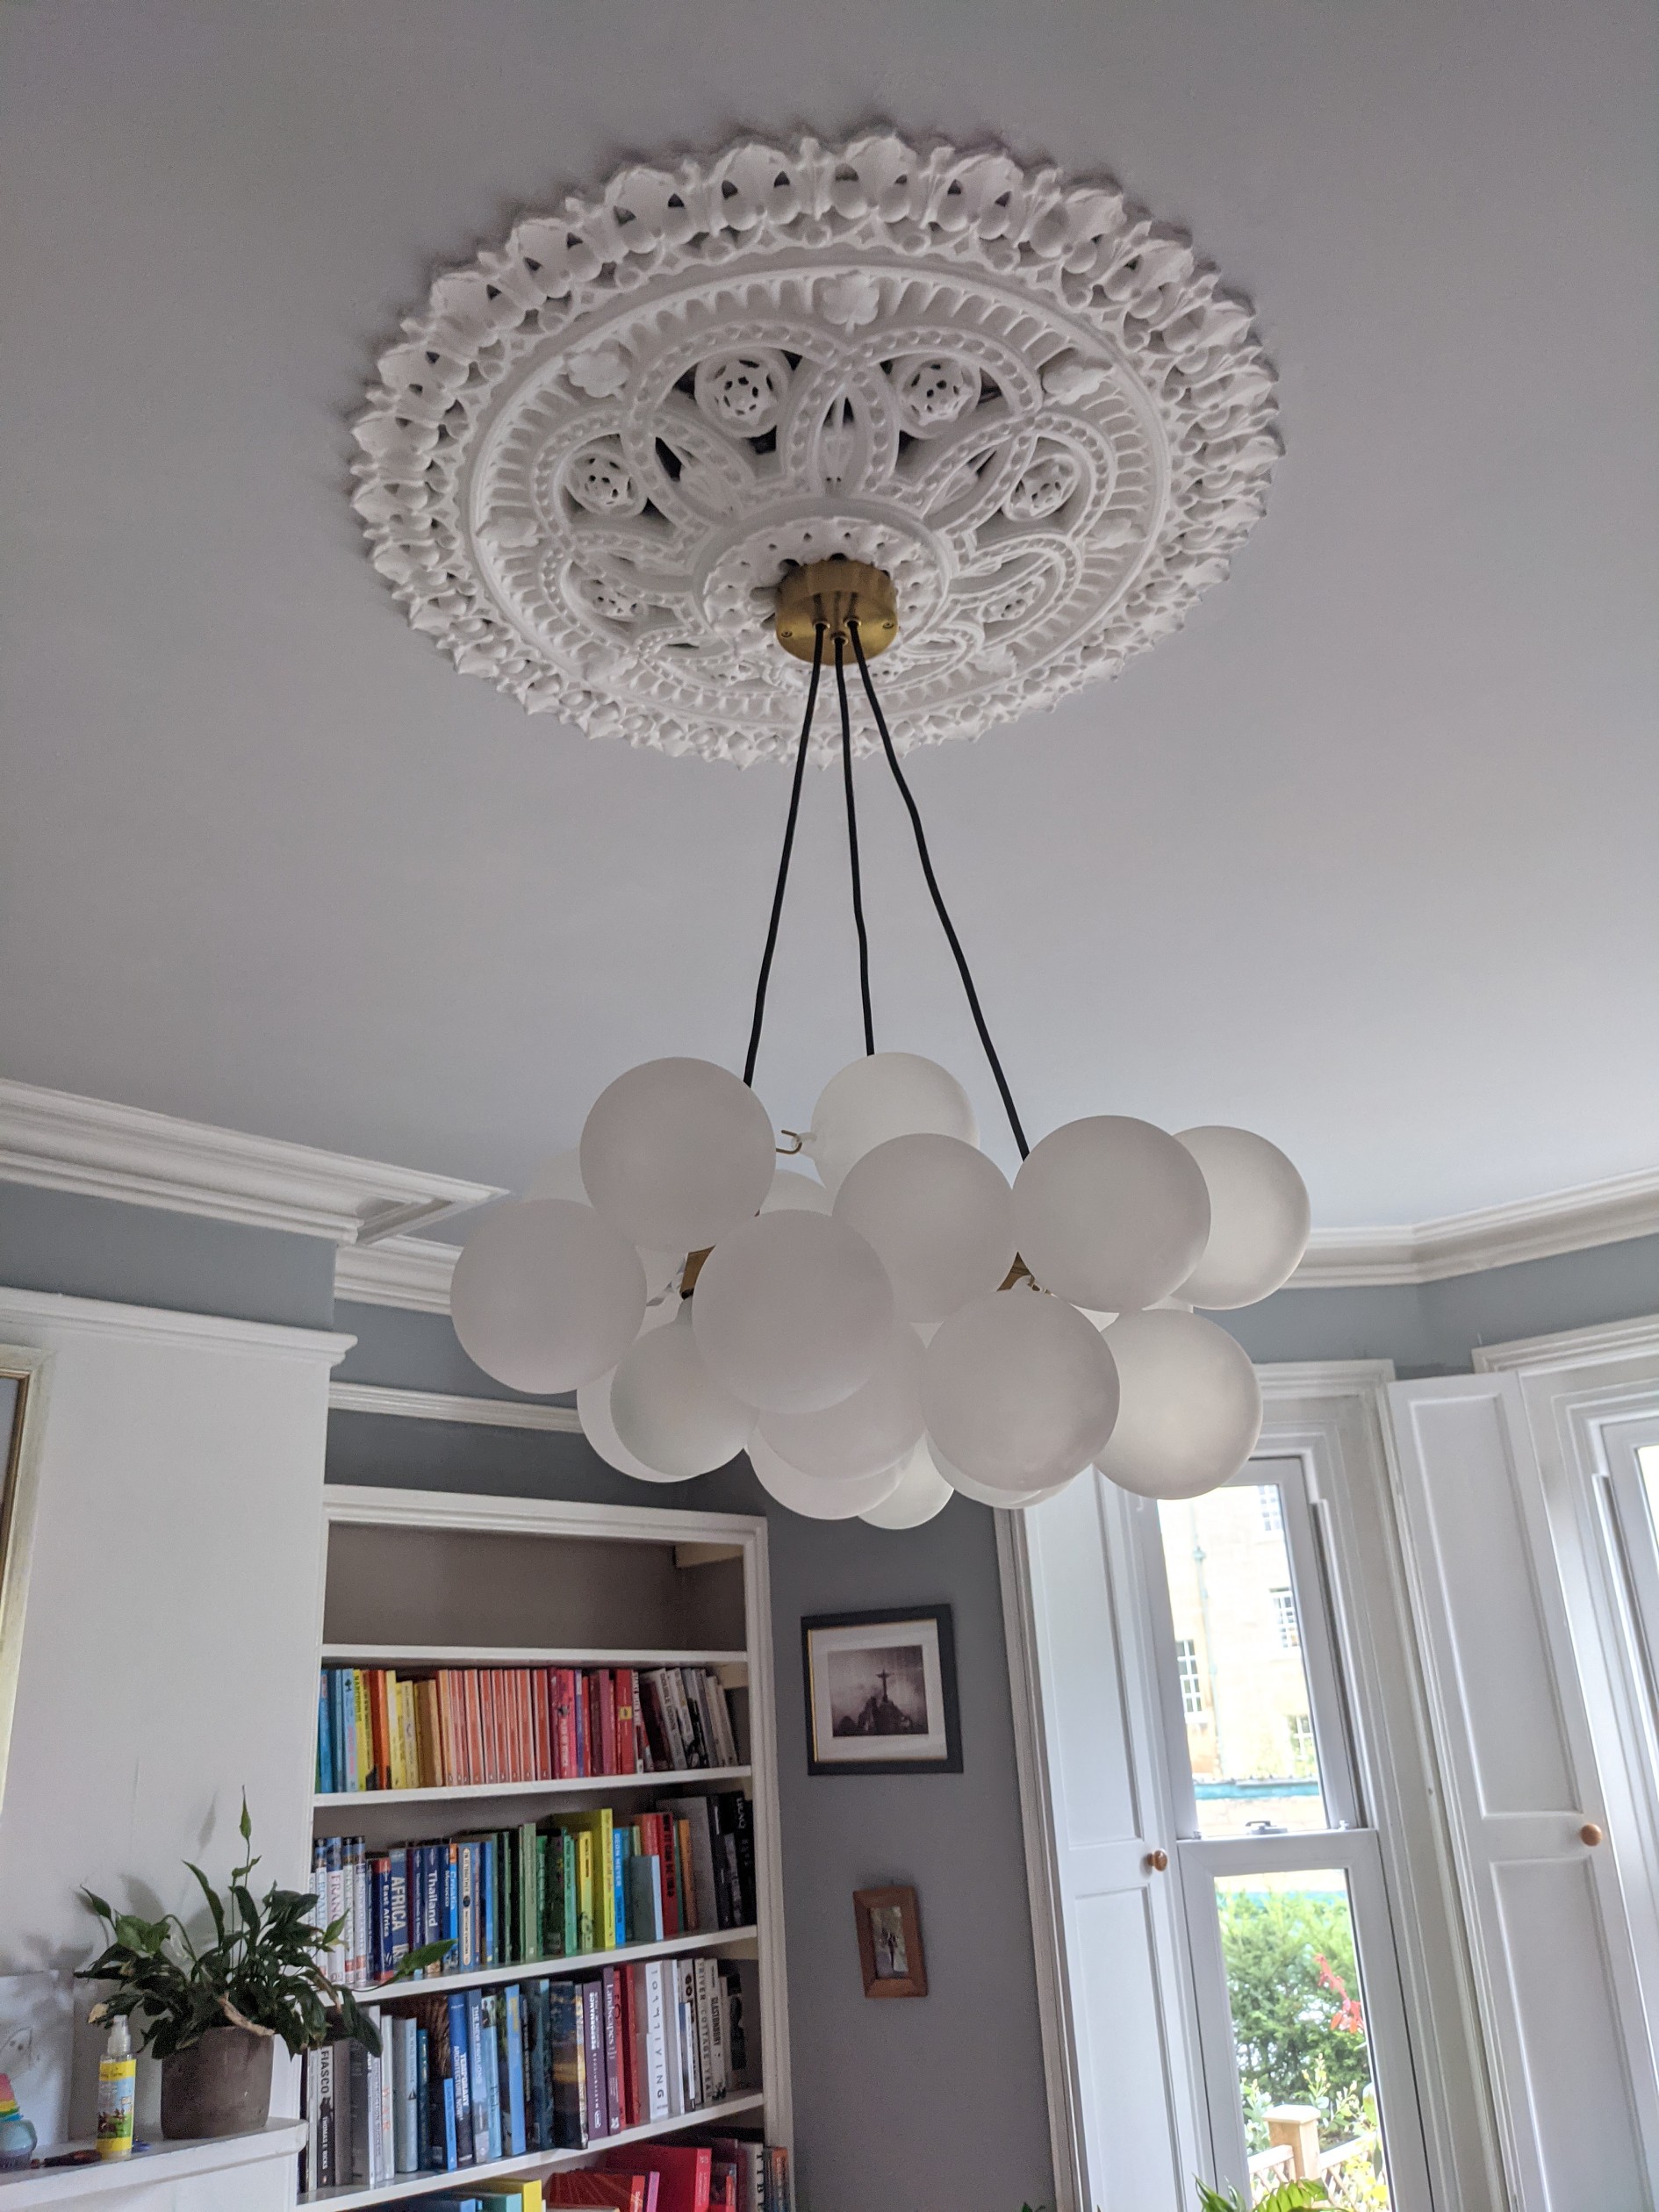 Bubble chandelier ceiling light replacement by electricians in Bath